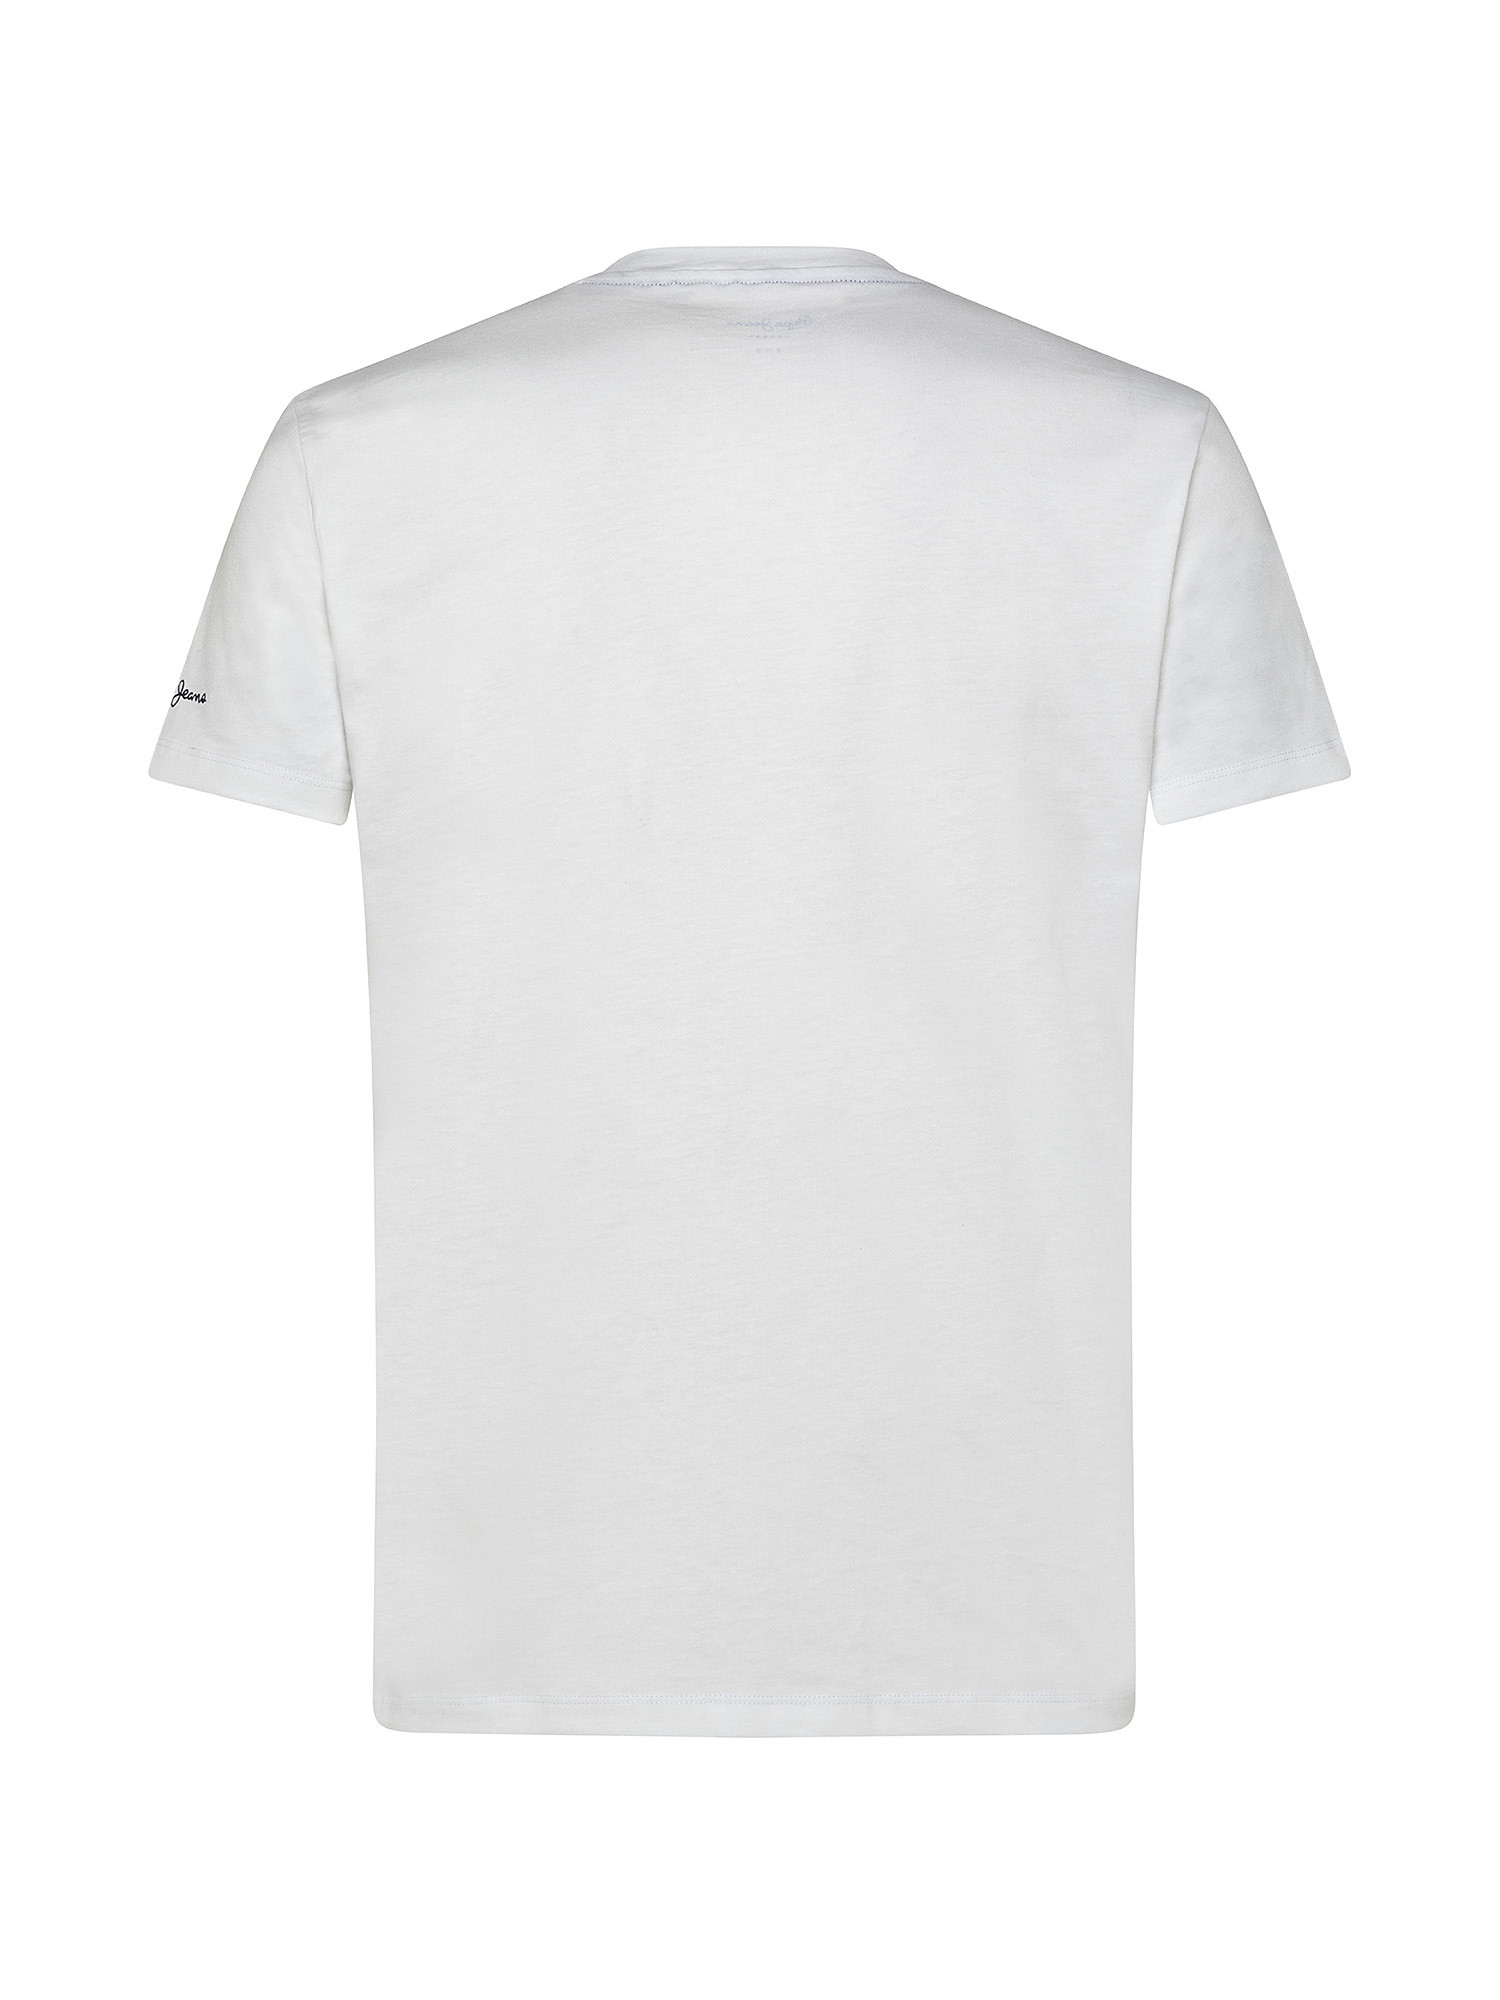 T-shirt in cotone Totem, Bianco, large image number 1